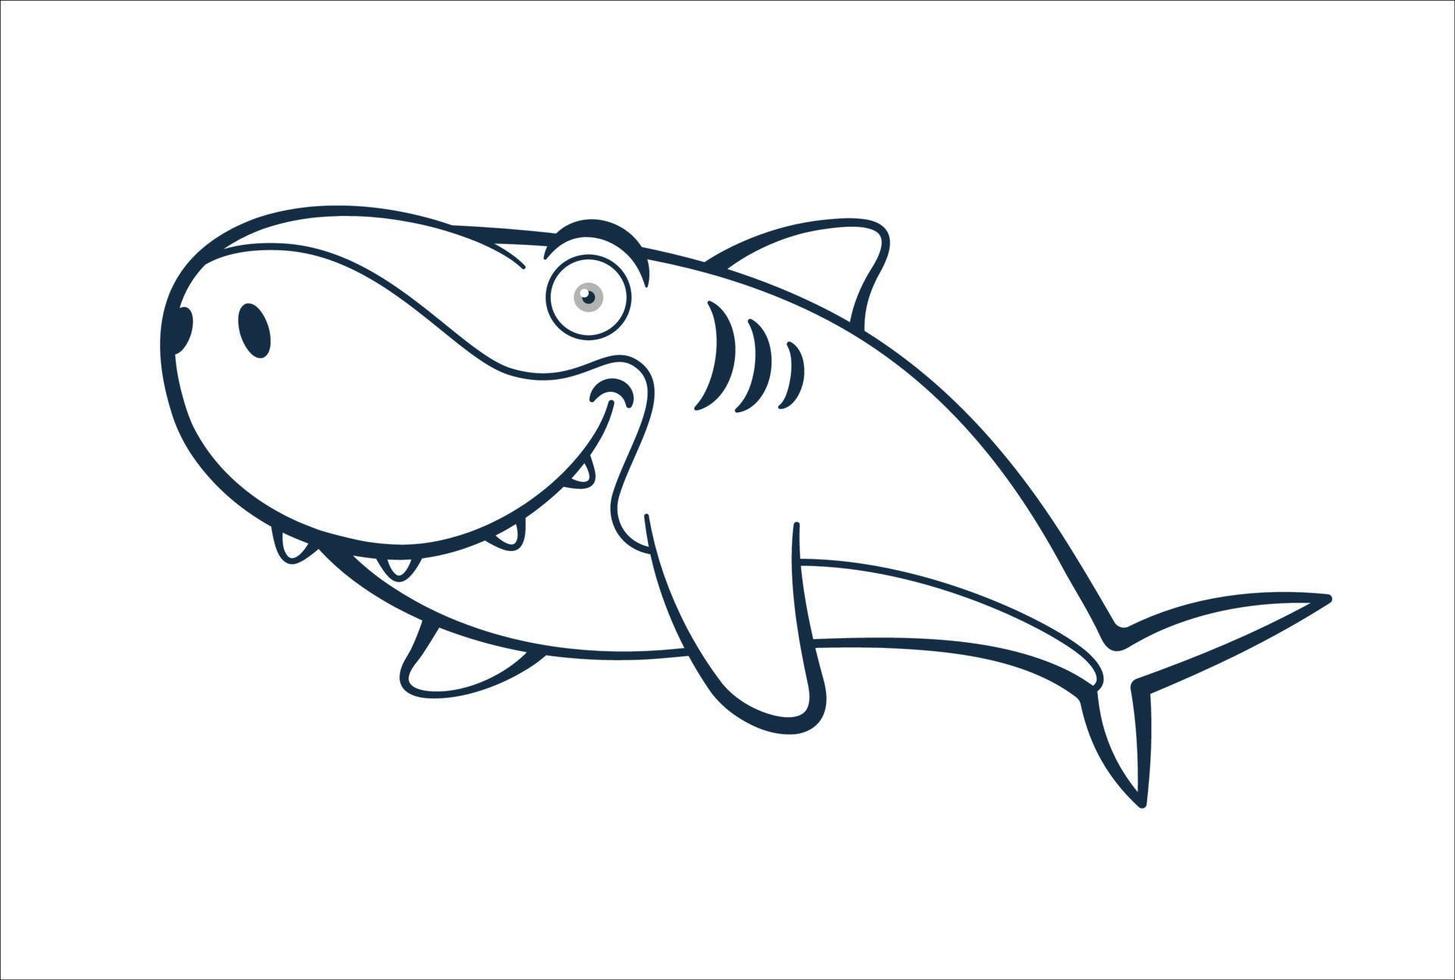 Shark With Smile Cartoon Character Outline vector